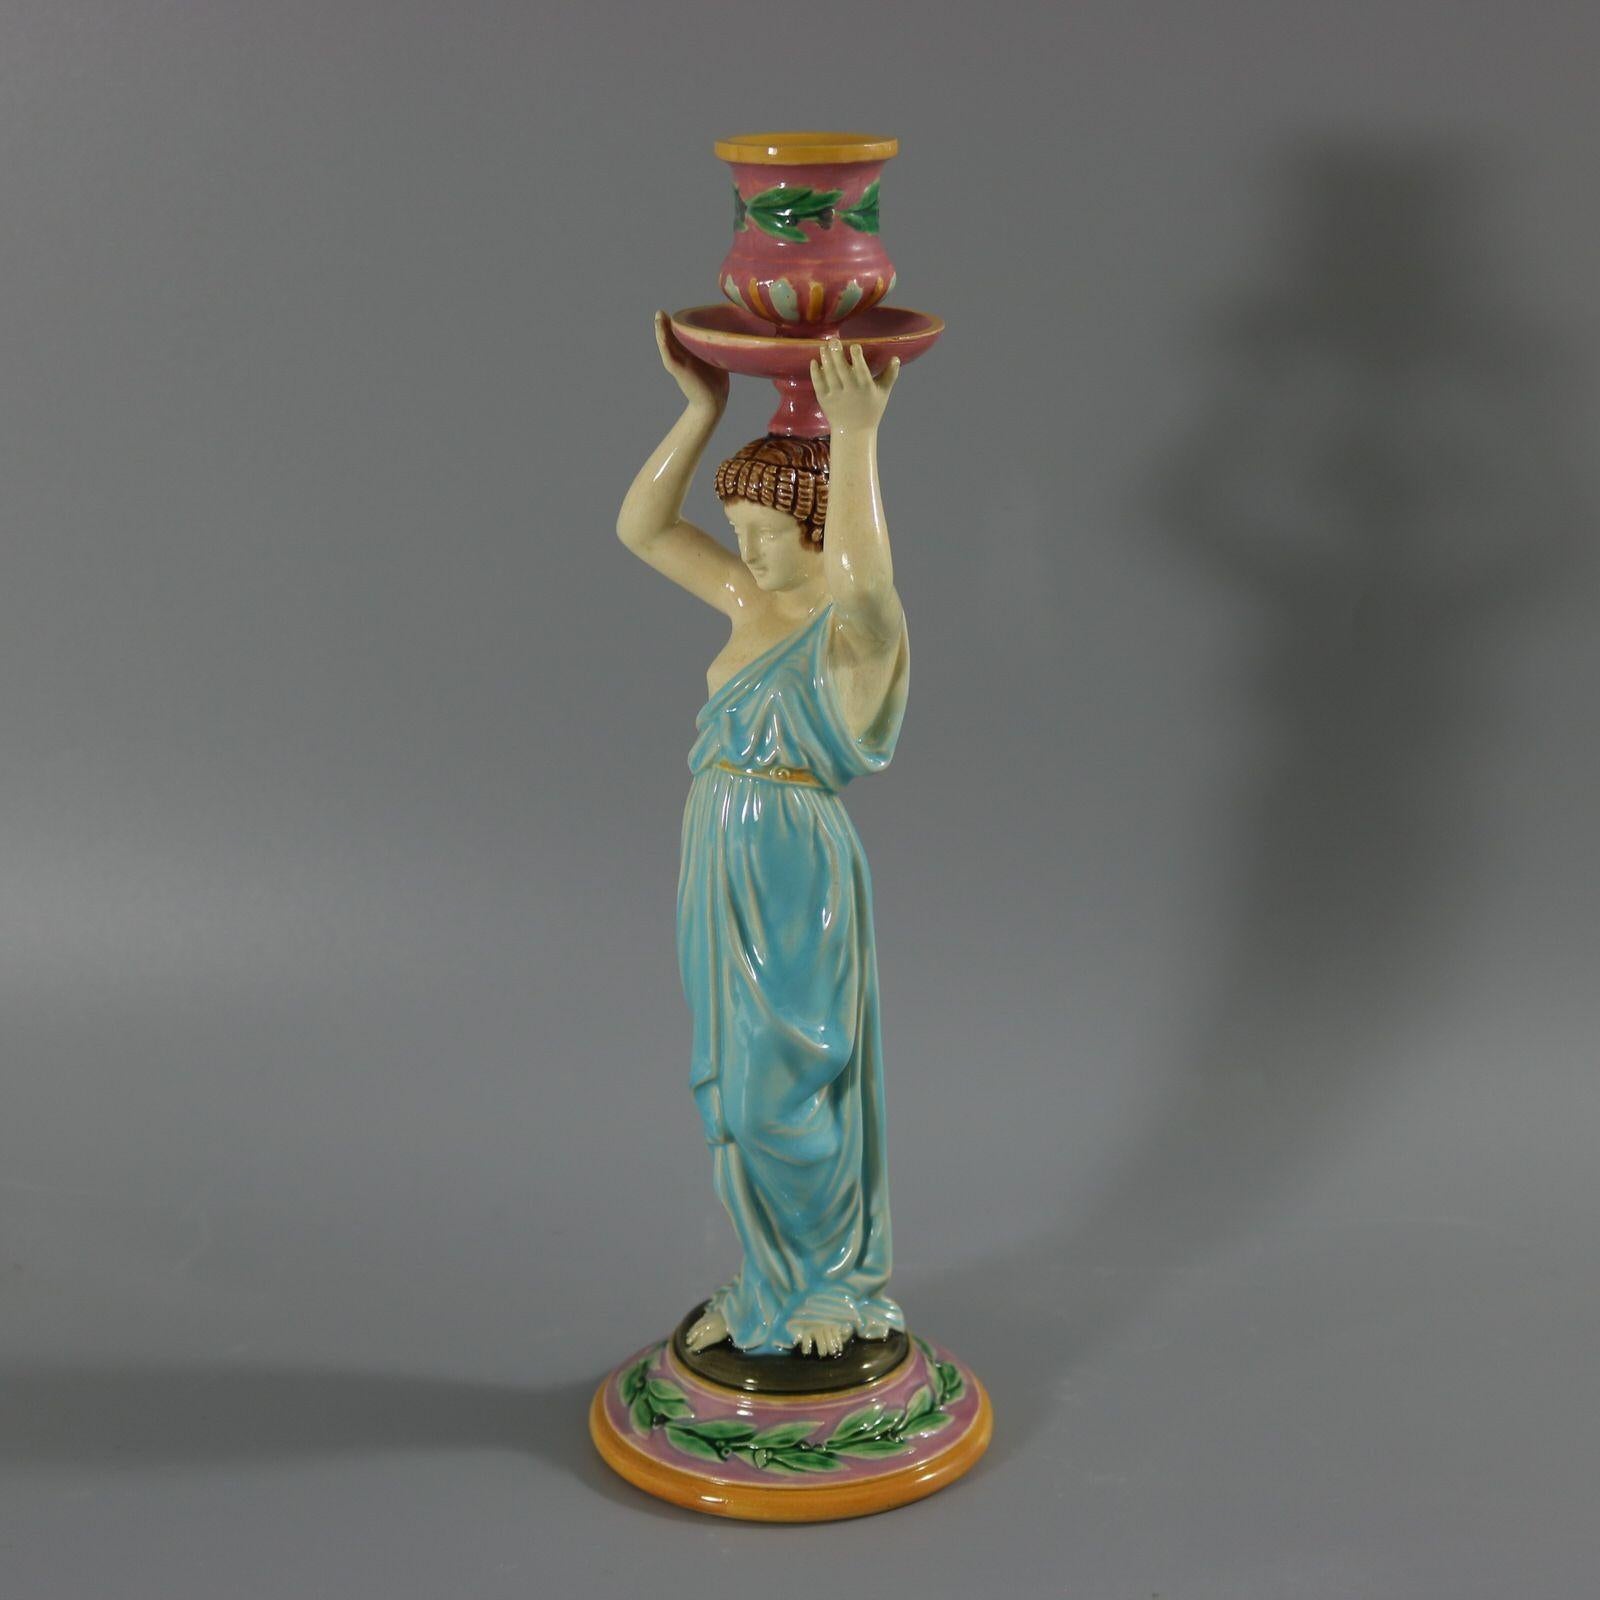 George Jones Majolica candlestick which features a lady dressed in a classical, flowing robe, holding the candle sconce above her head. This piece is one of a few George Jones pieces inspired by Ancient Egypt and the Egyptians. Colouration: